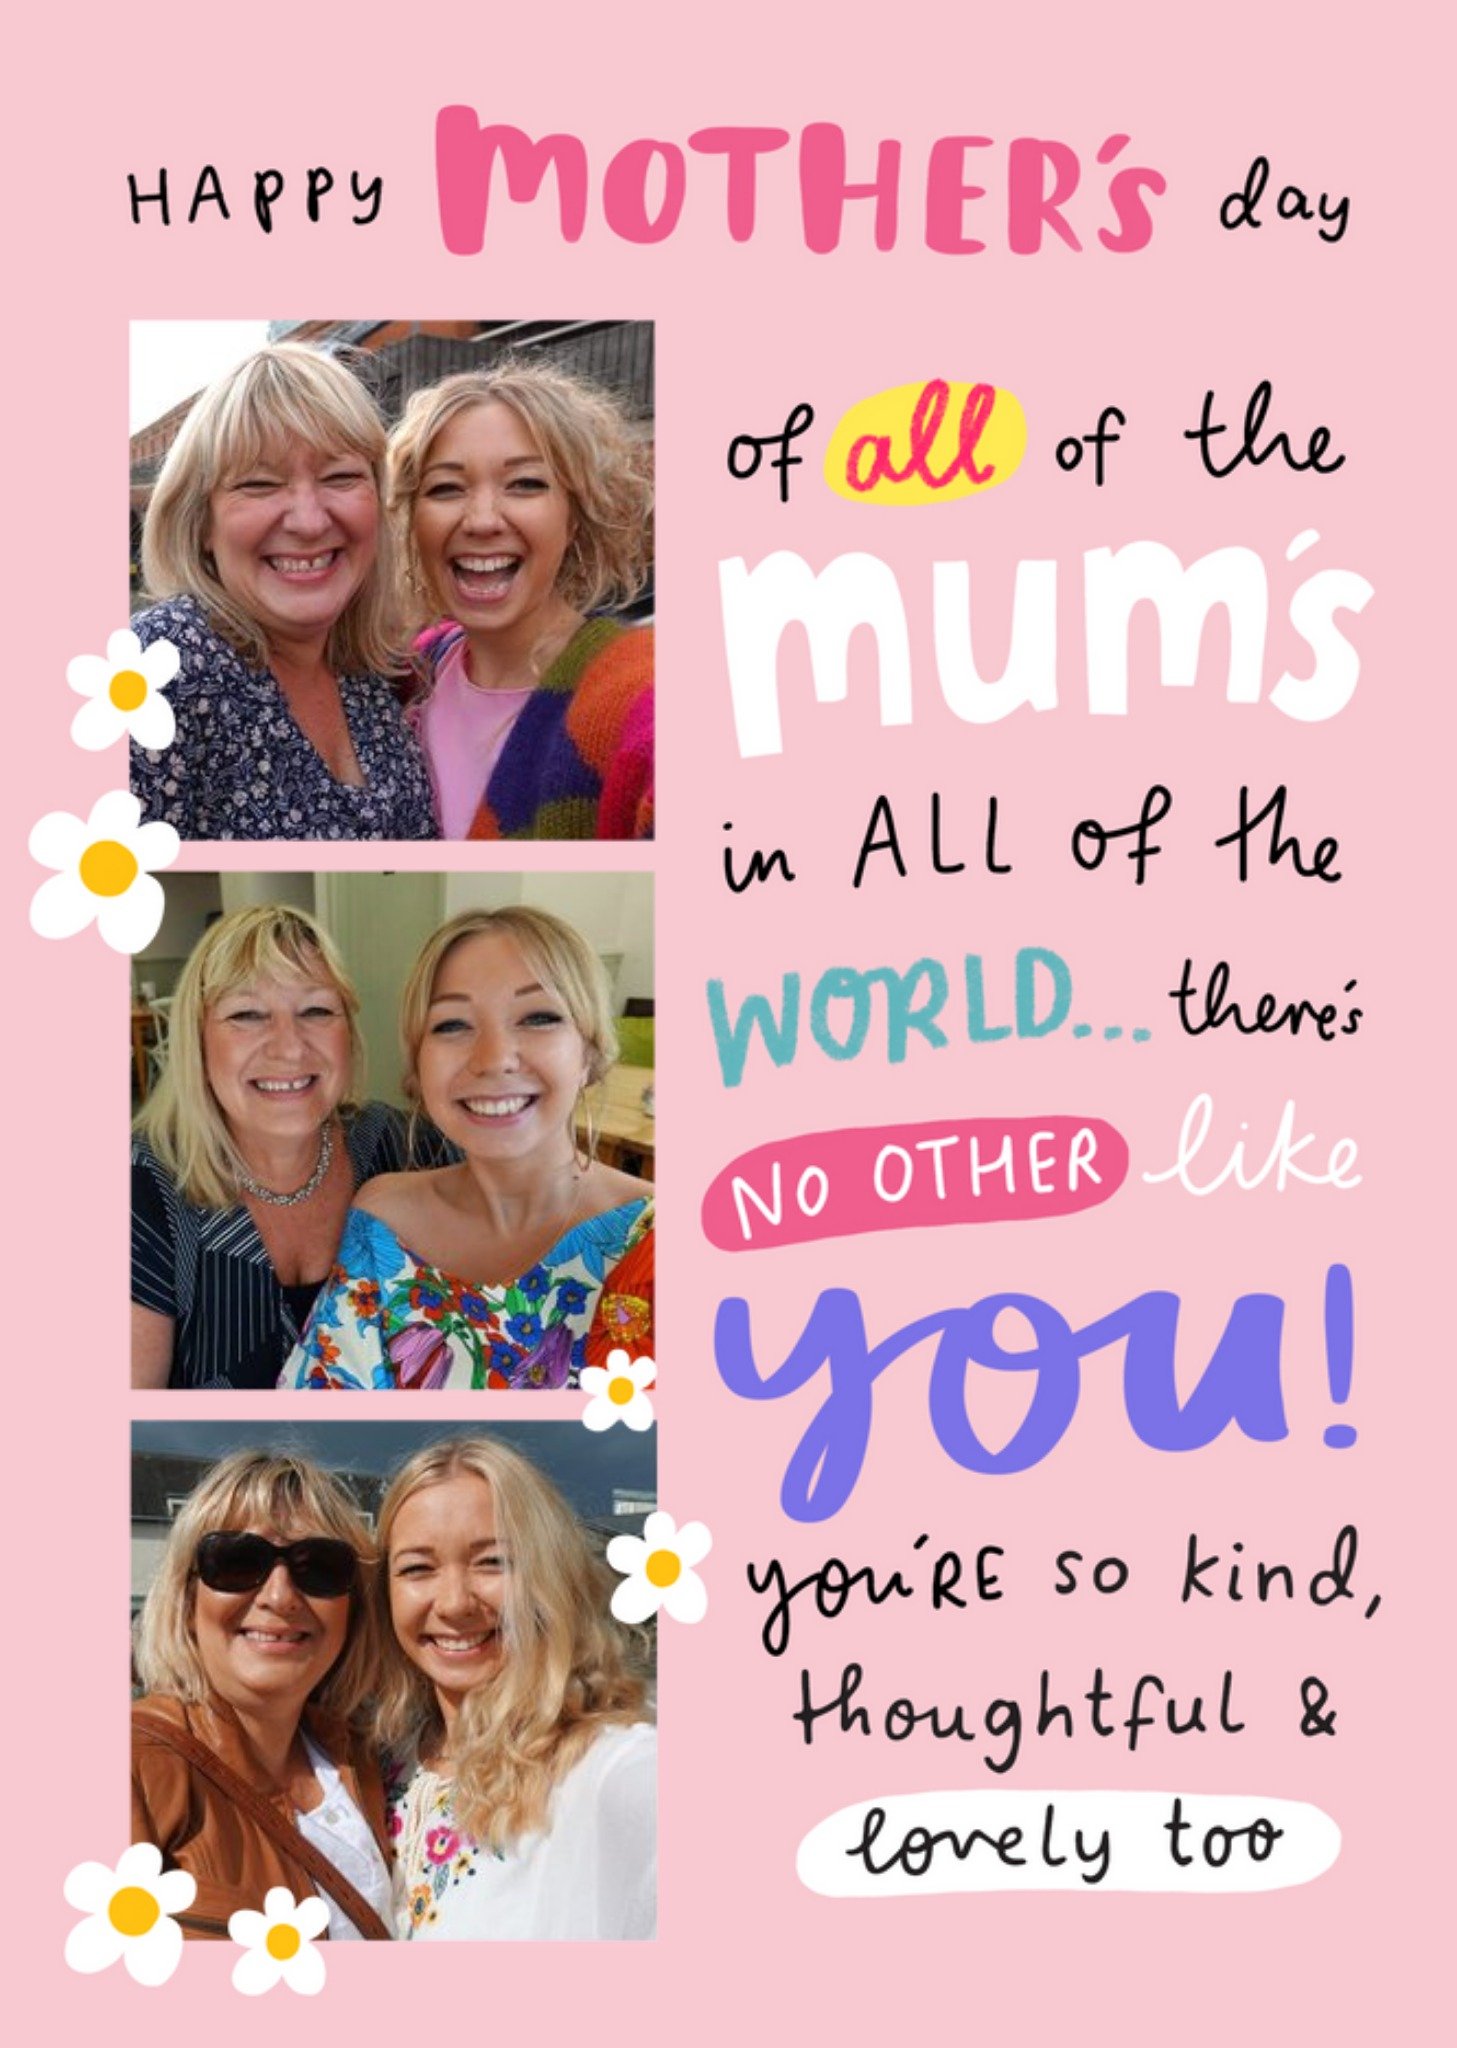 Moonpig To All The Mother's In The World Theres No Other Like You Photo Upload Mothers Day Card, Lar